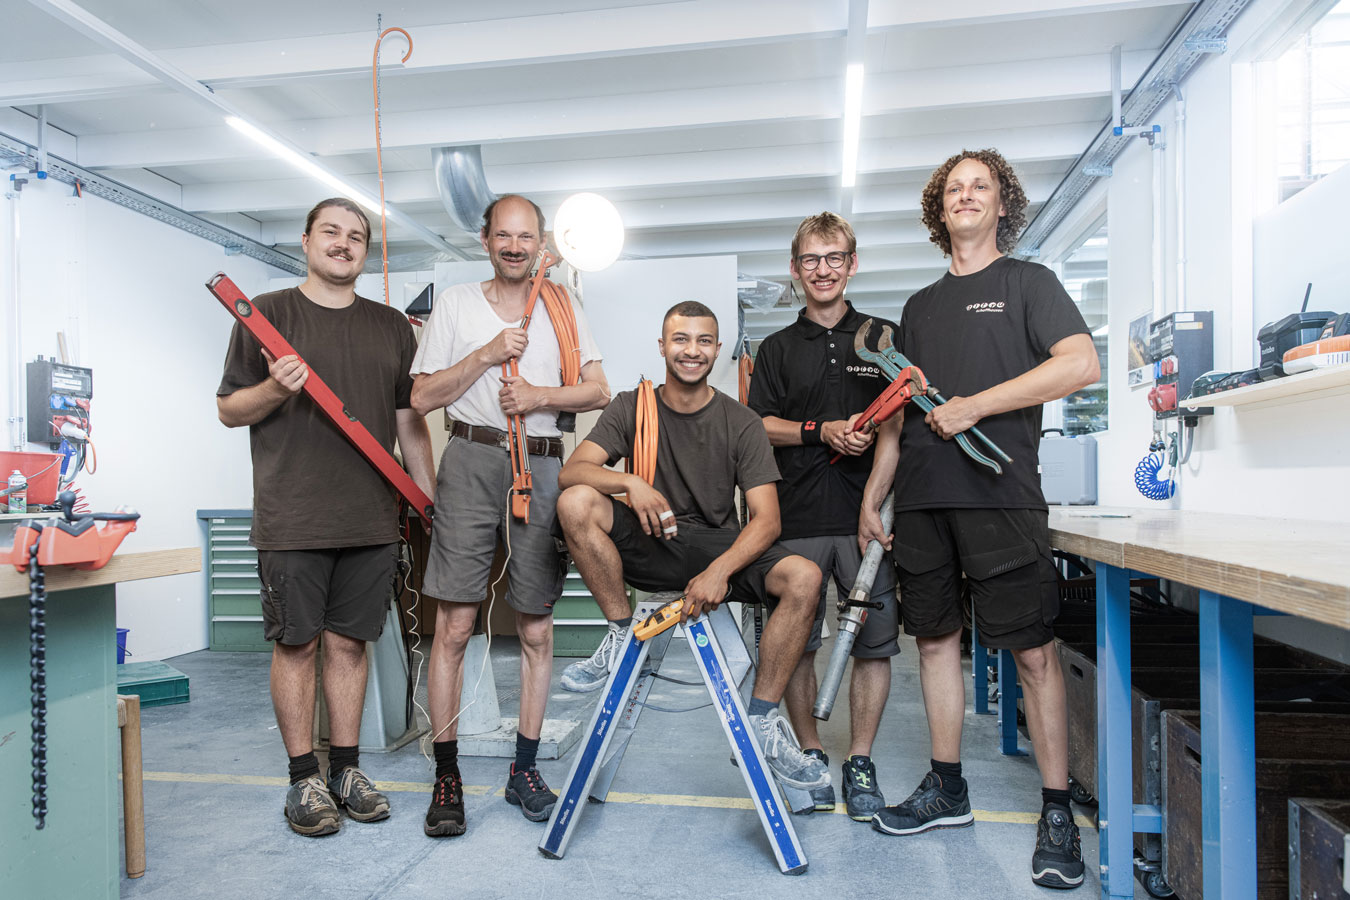 Picture with 5 people from the Engineering and Maintenance team in a workshop room. Each person is holding an object: spirit level, a luminous lamp, cables and two different pliers.